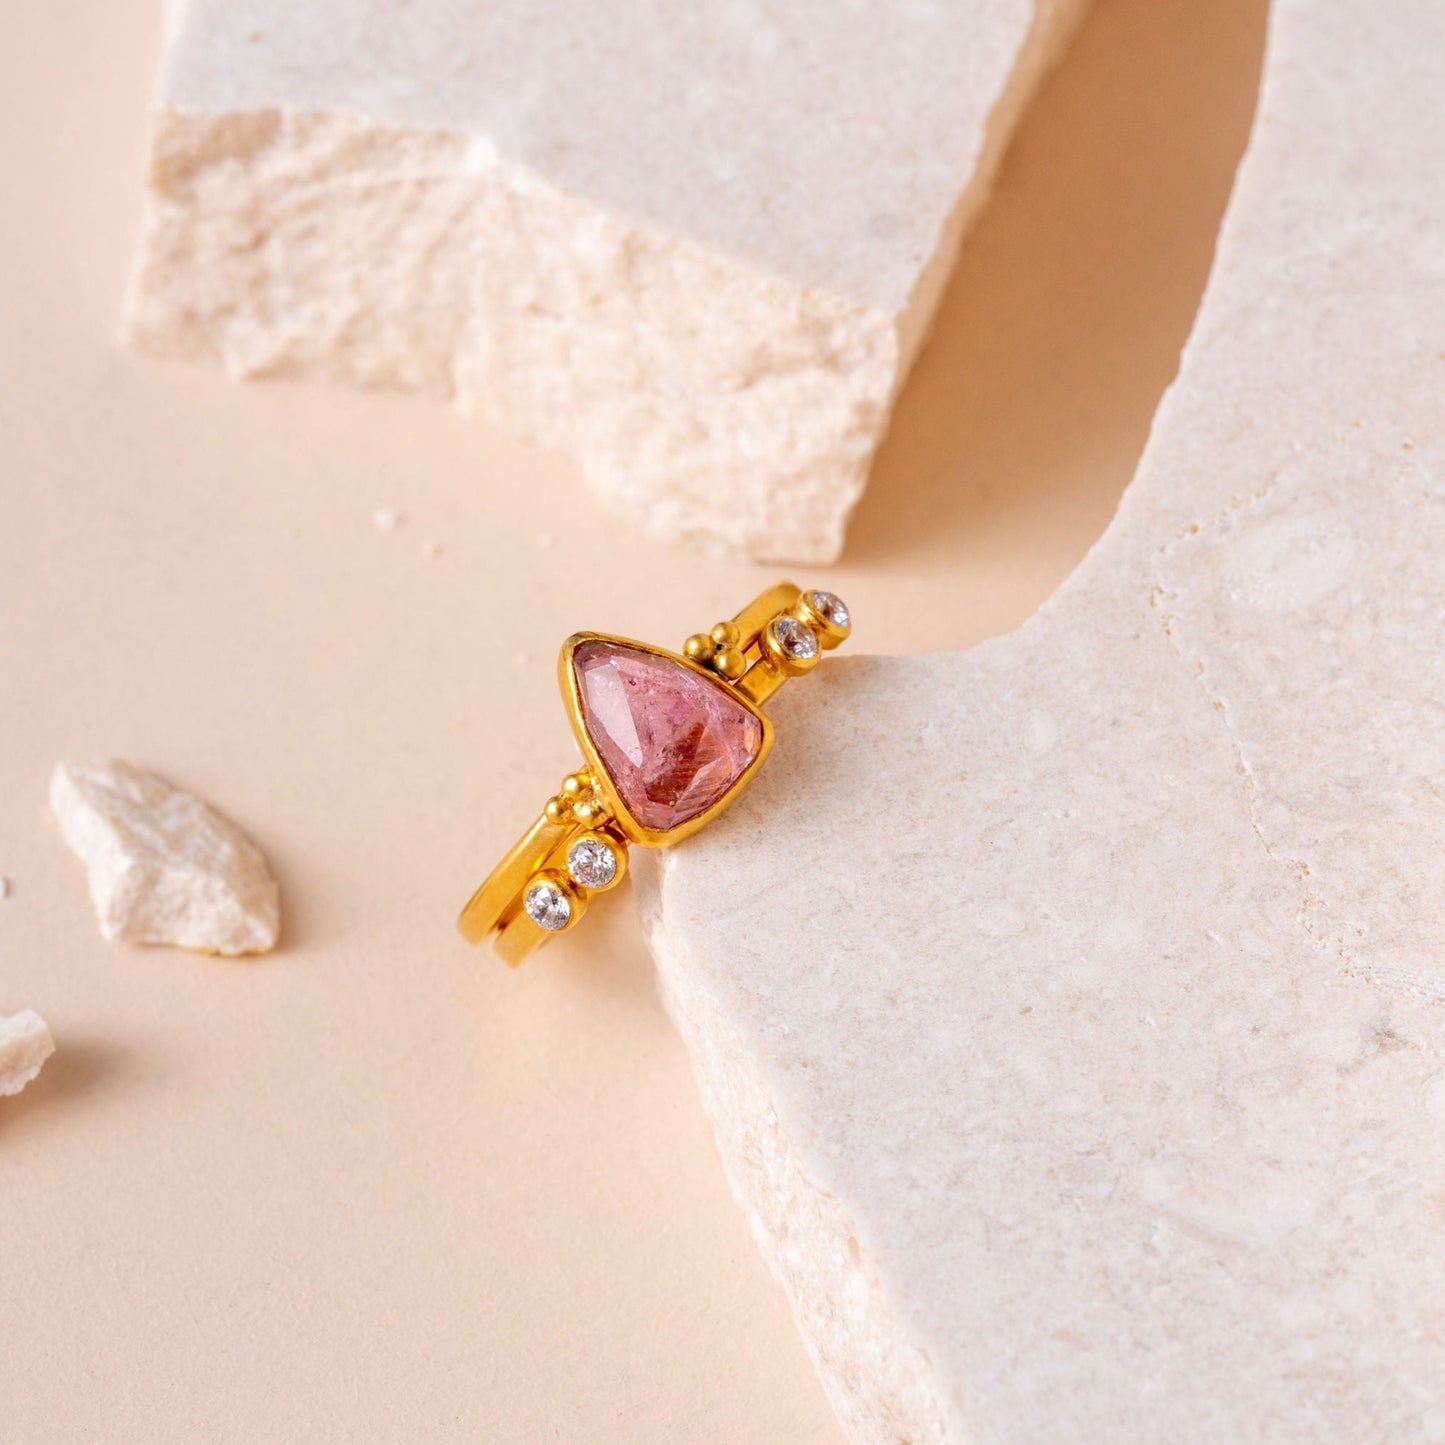 Artisan made gold ring, featuring a hand-cut pink tourmaline gem and intricate granulation for a look of refined elegance.